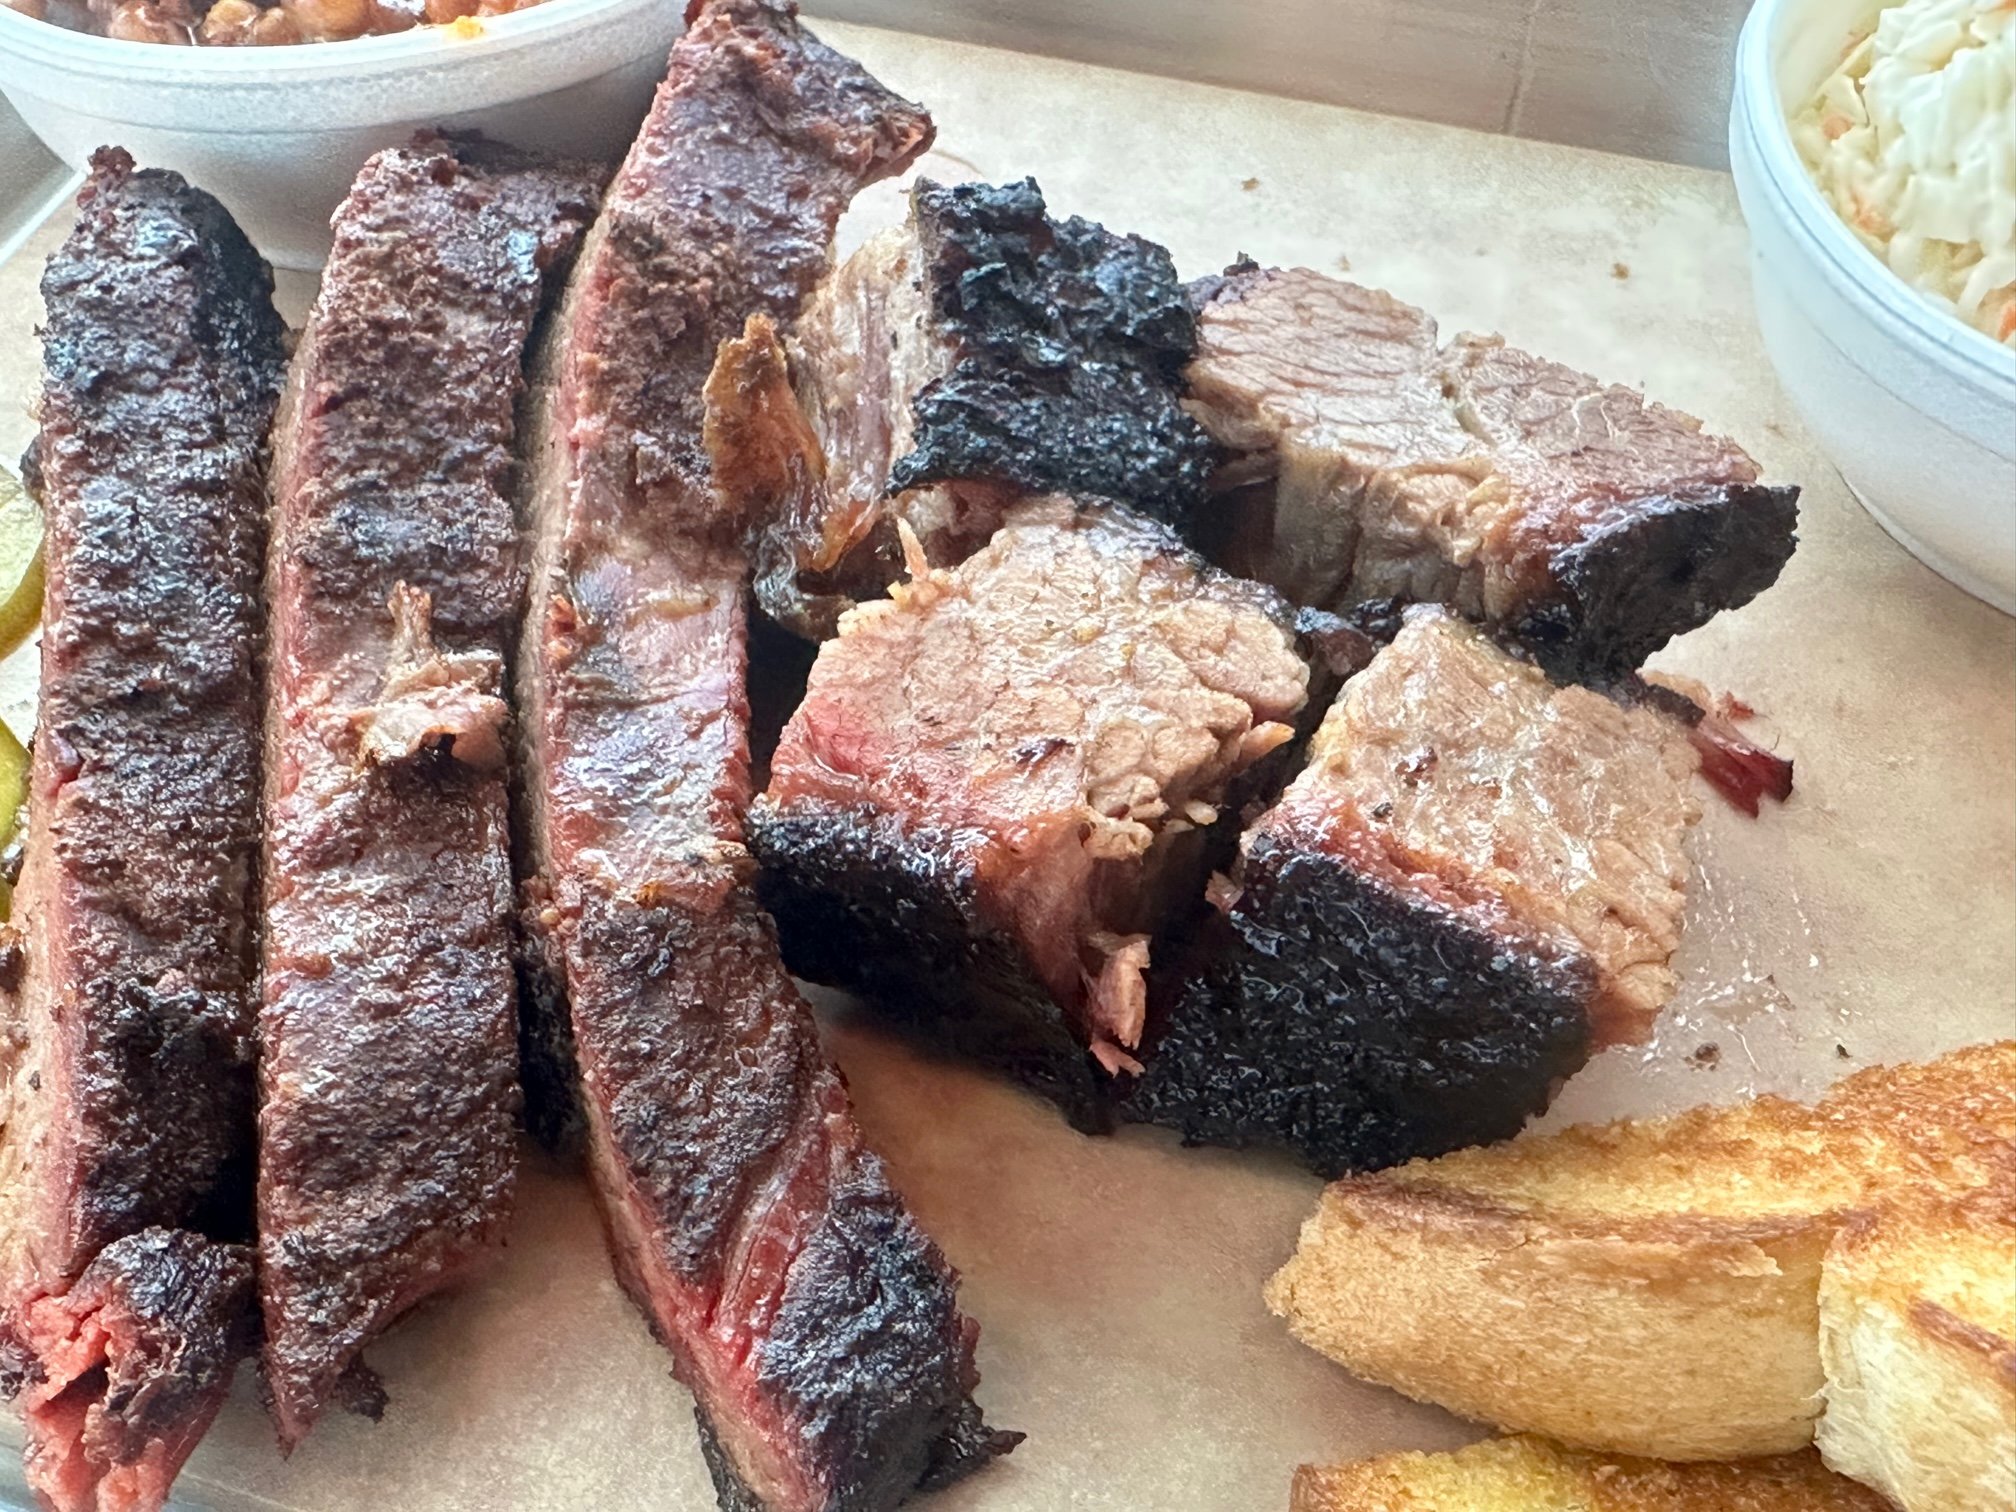 Two Meats All-Star Platter